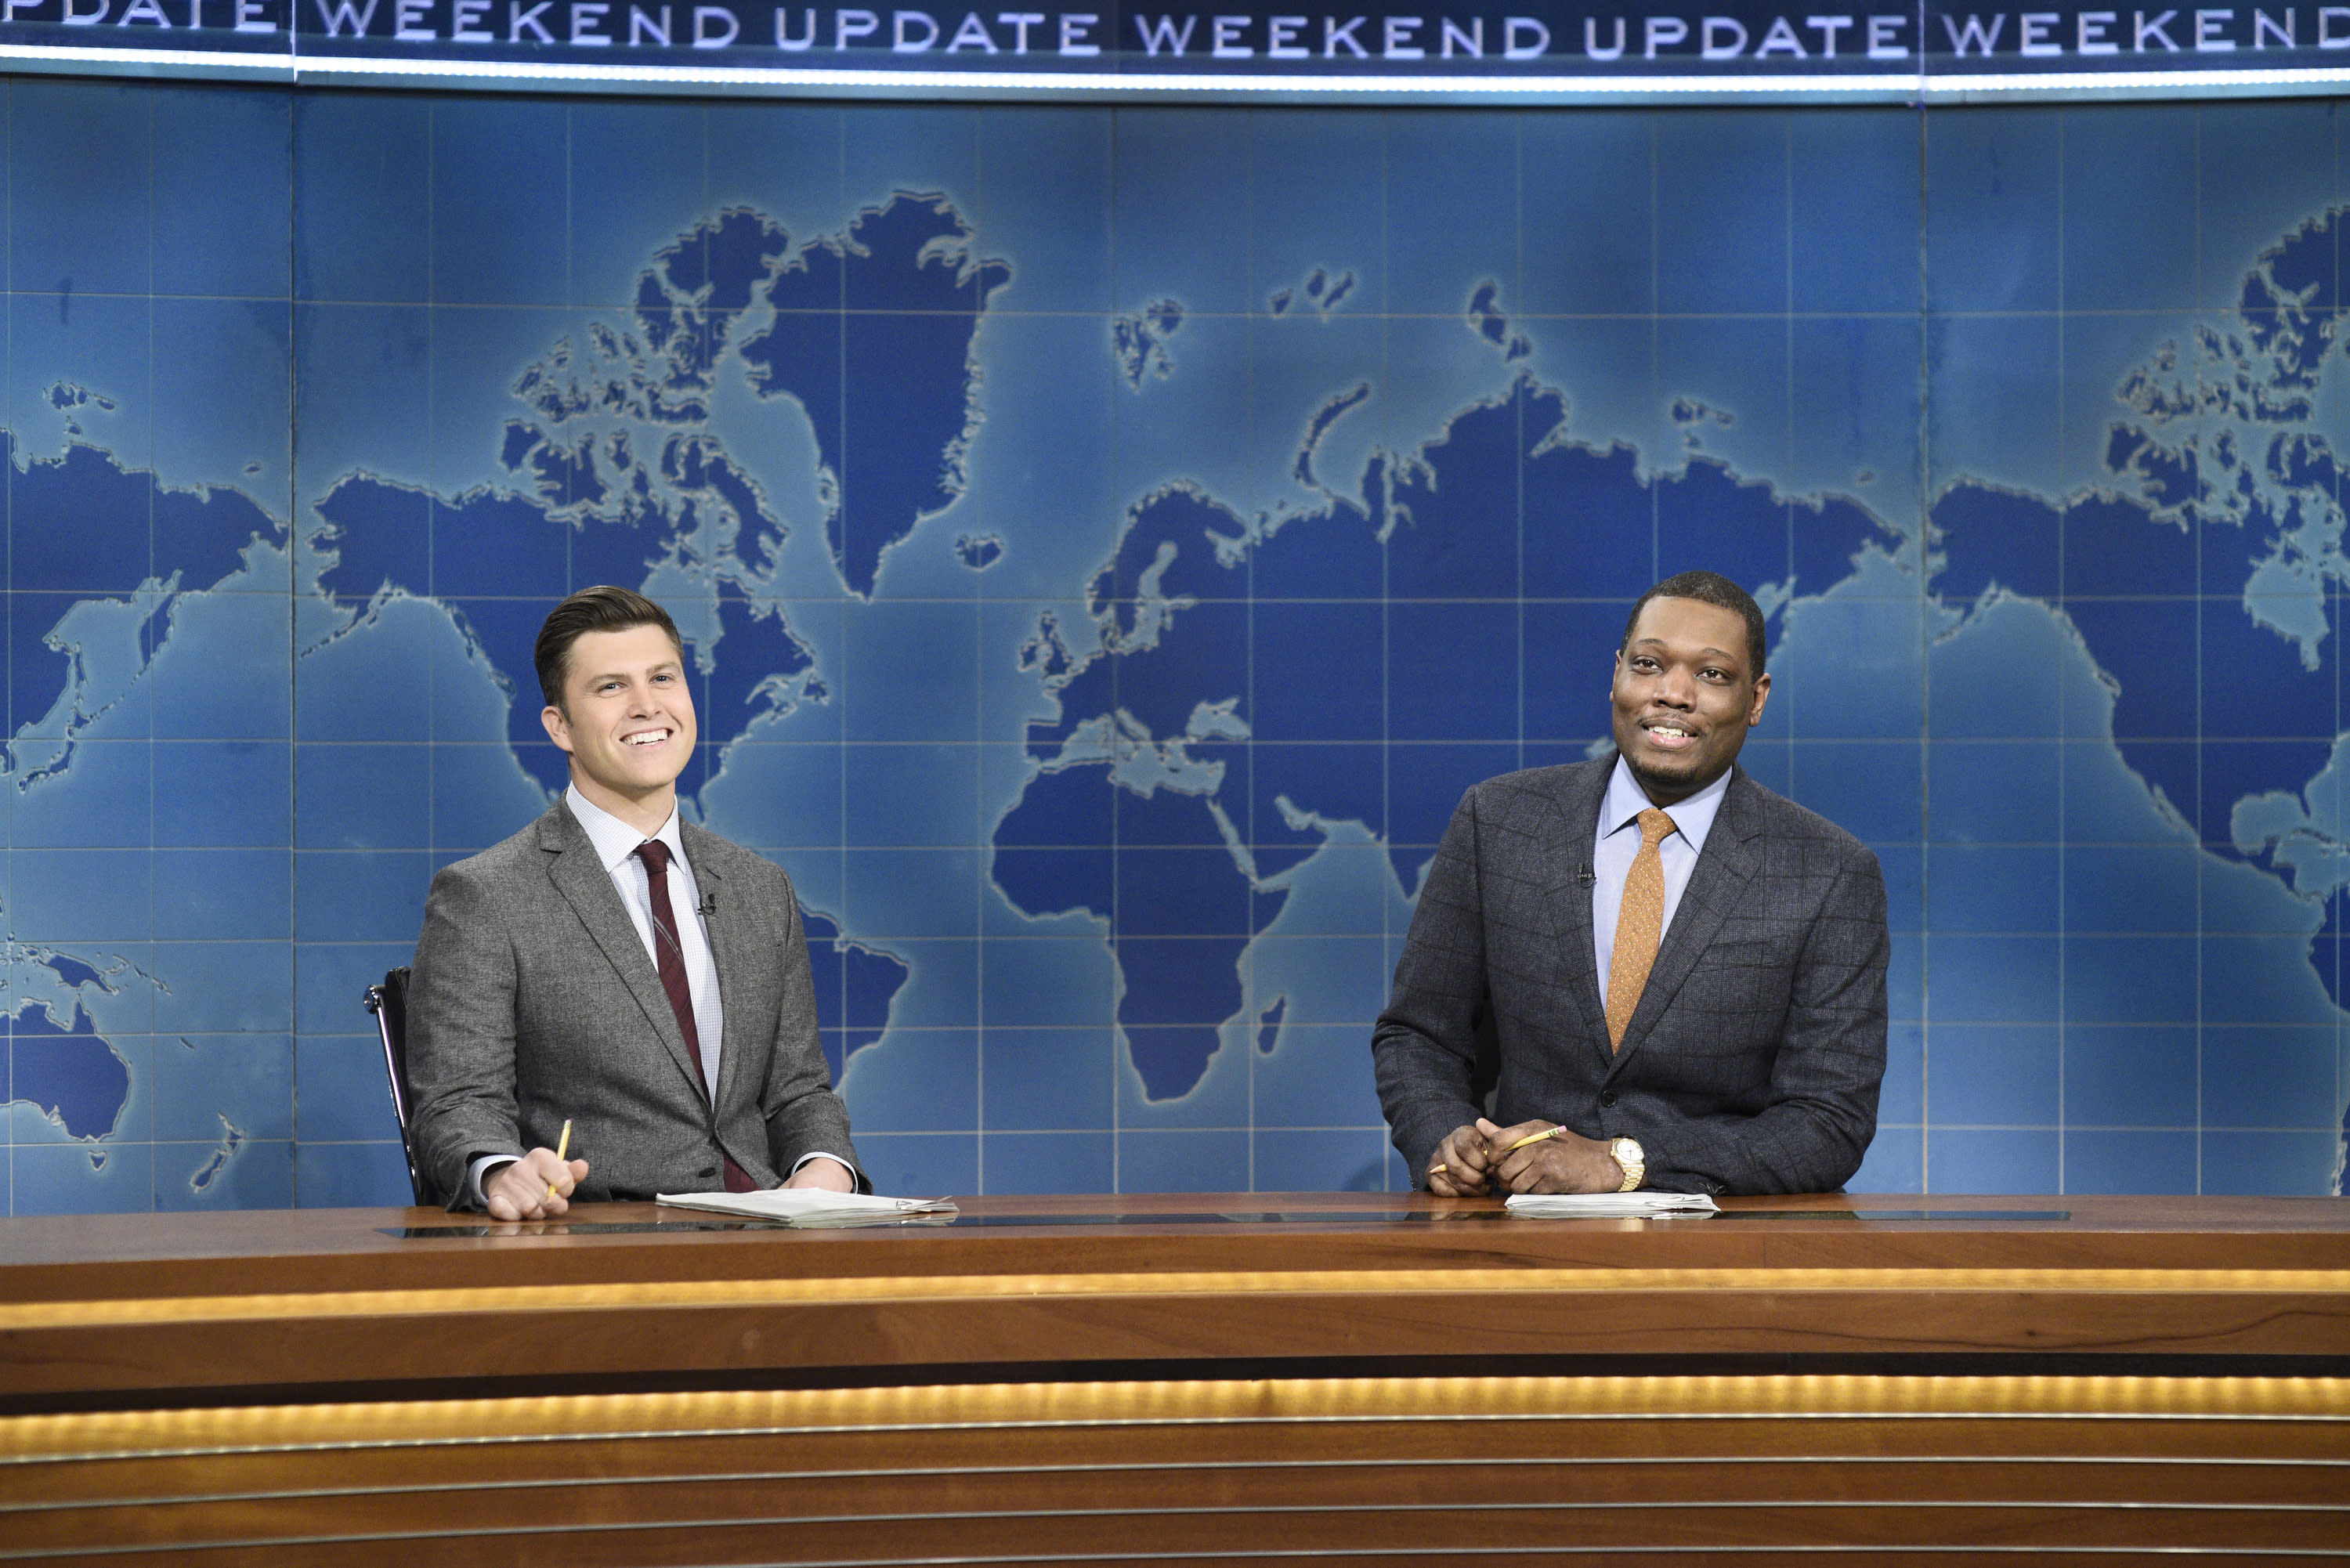 ‘Saturday Night Live’ To Air FullLength New Episode Live On Both